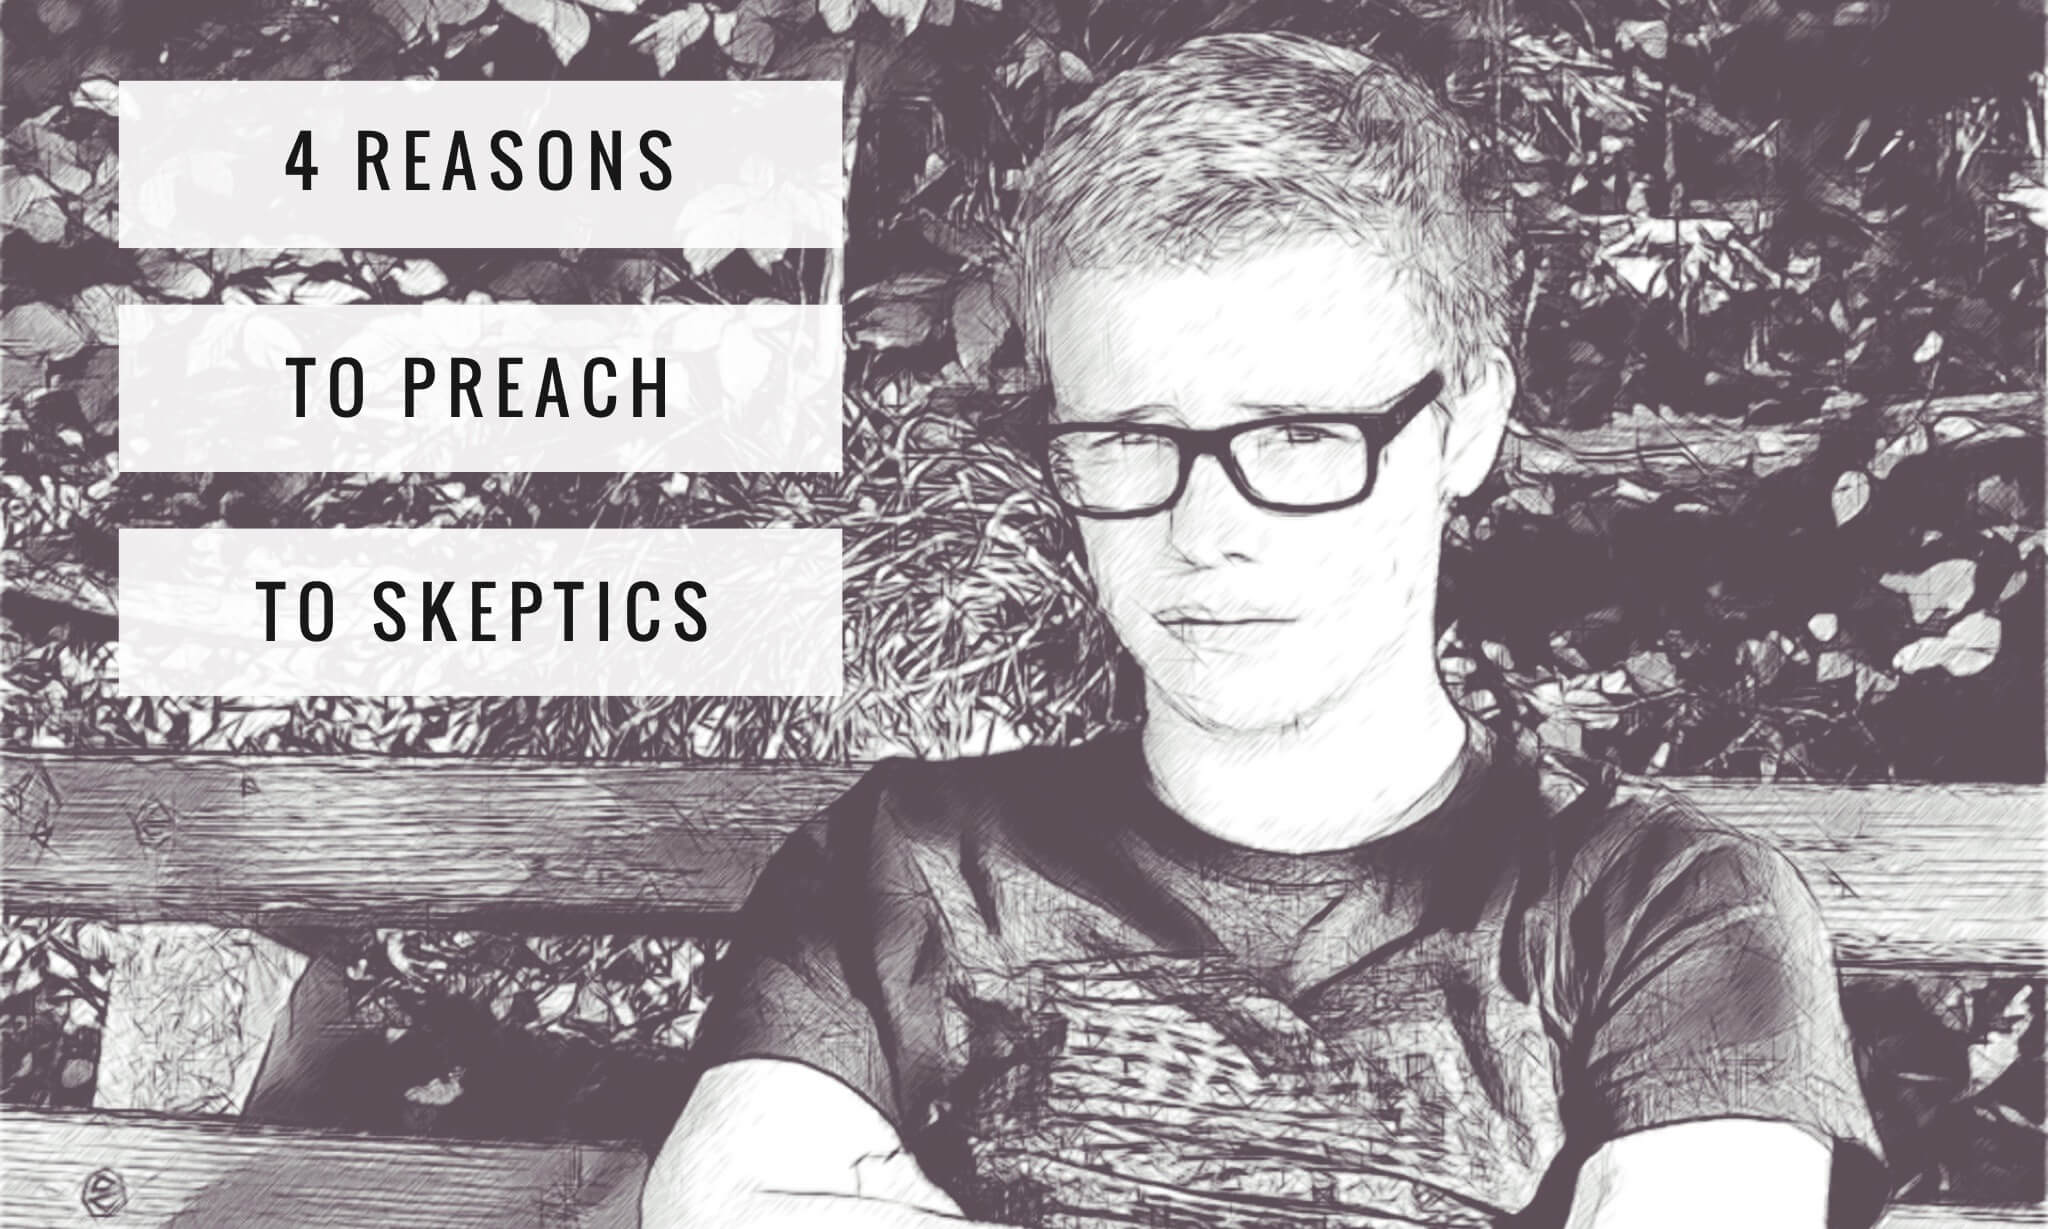 4 reasons to preach to skeptics in every sermon